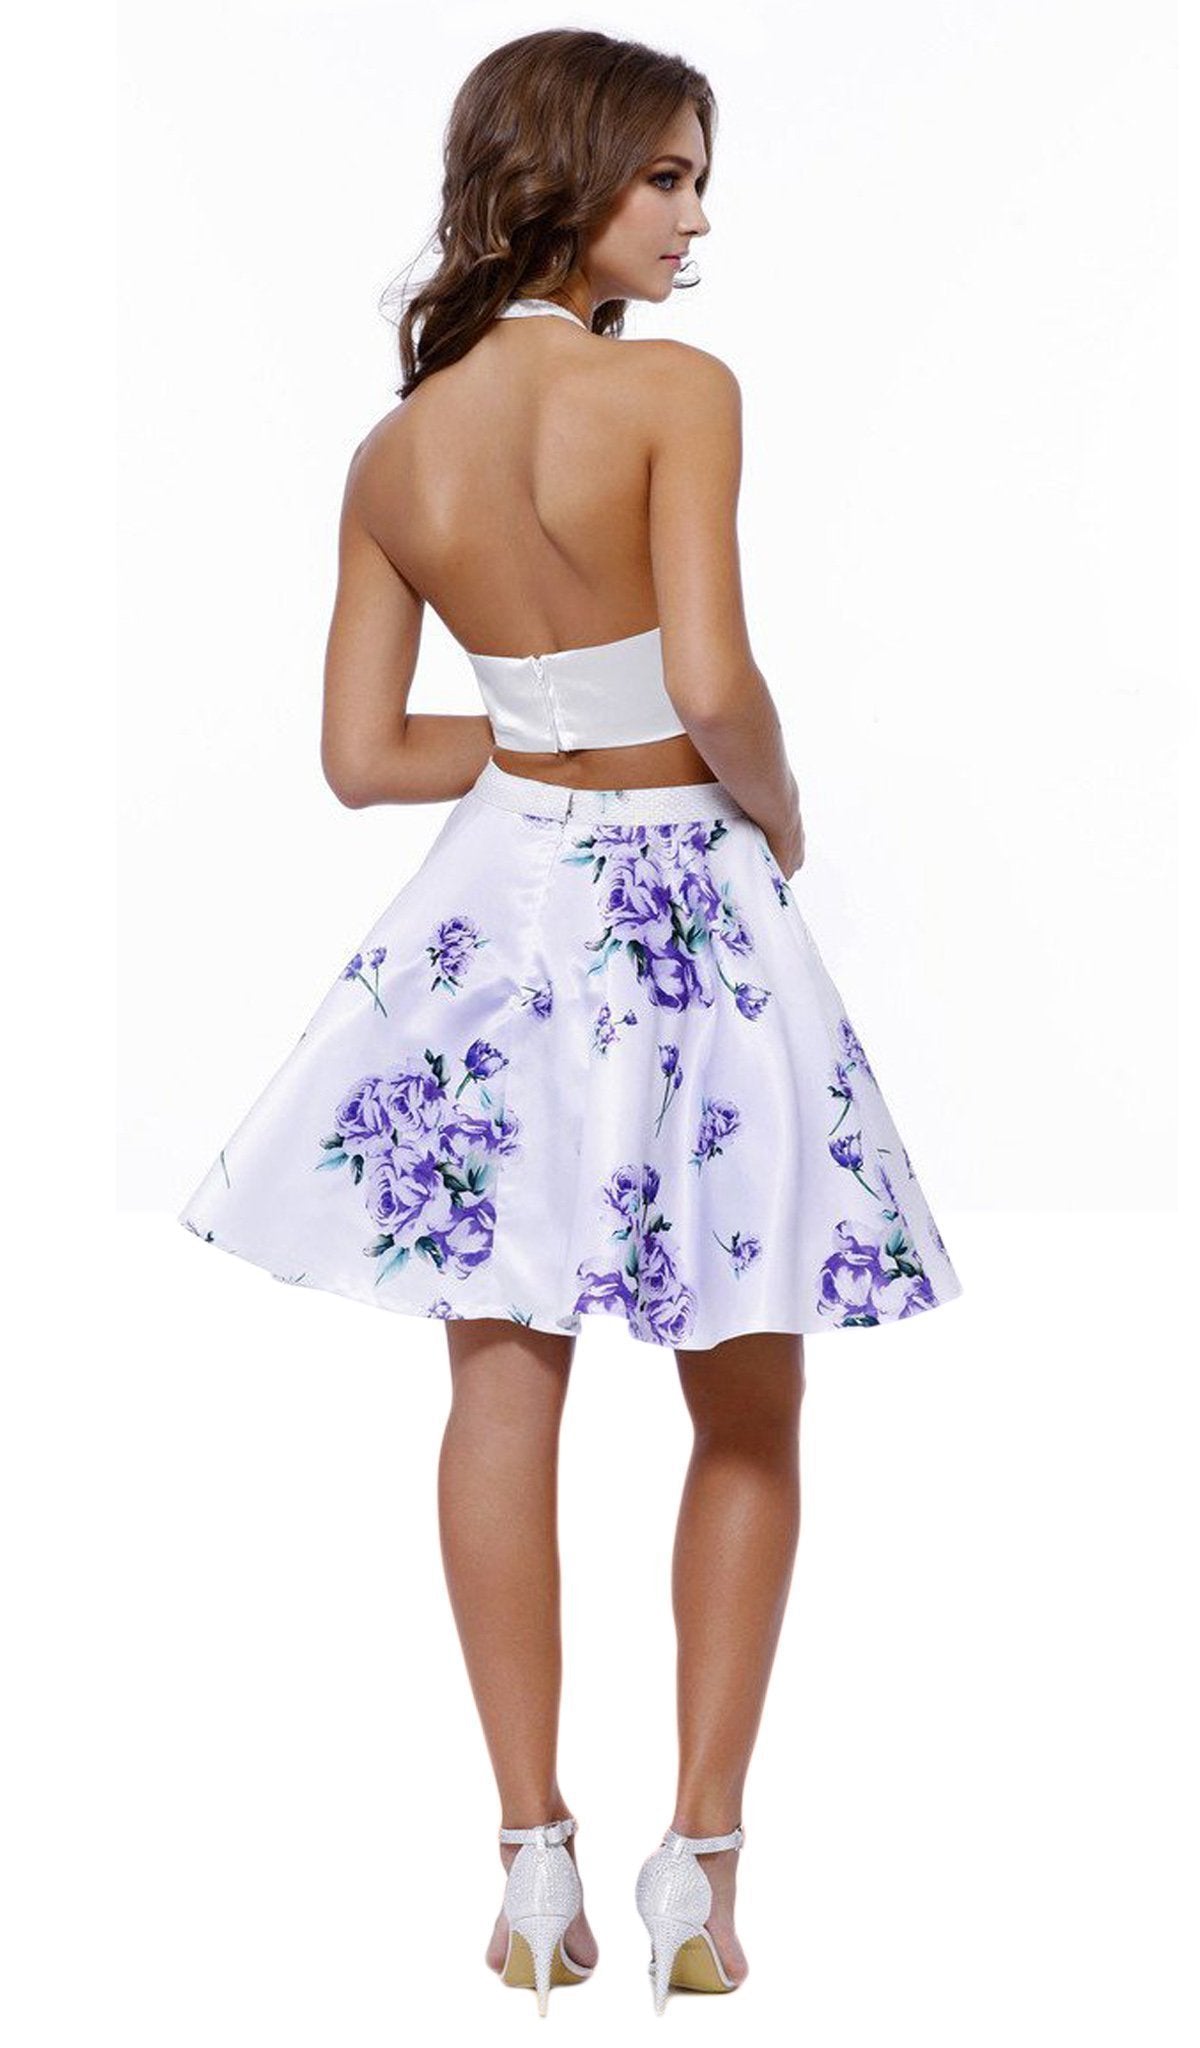 Nox Anabel - 6222 Two-Piece Halter Floral Print Cocktail Dress Special Occasion Dress